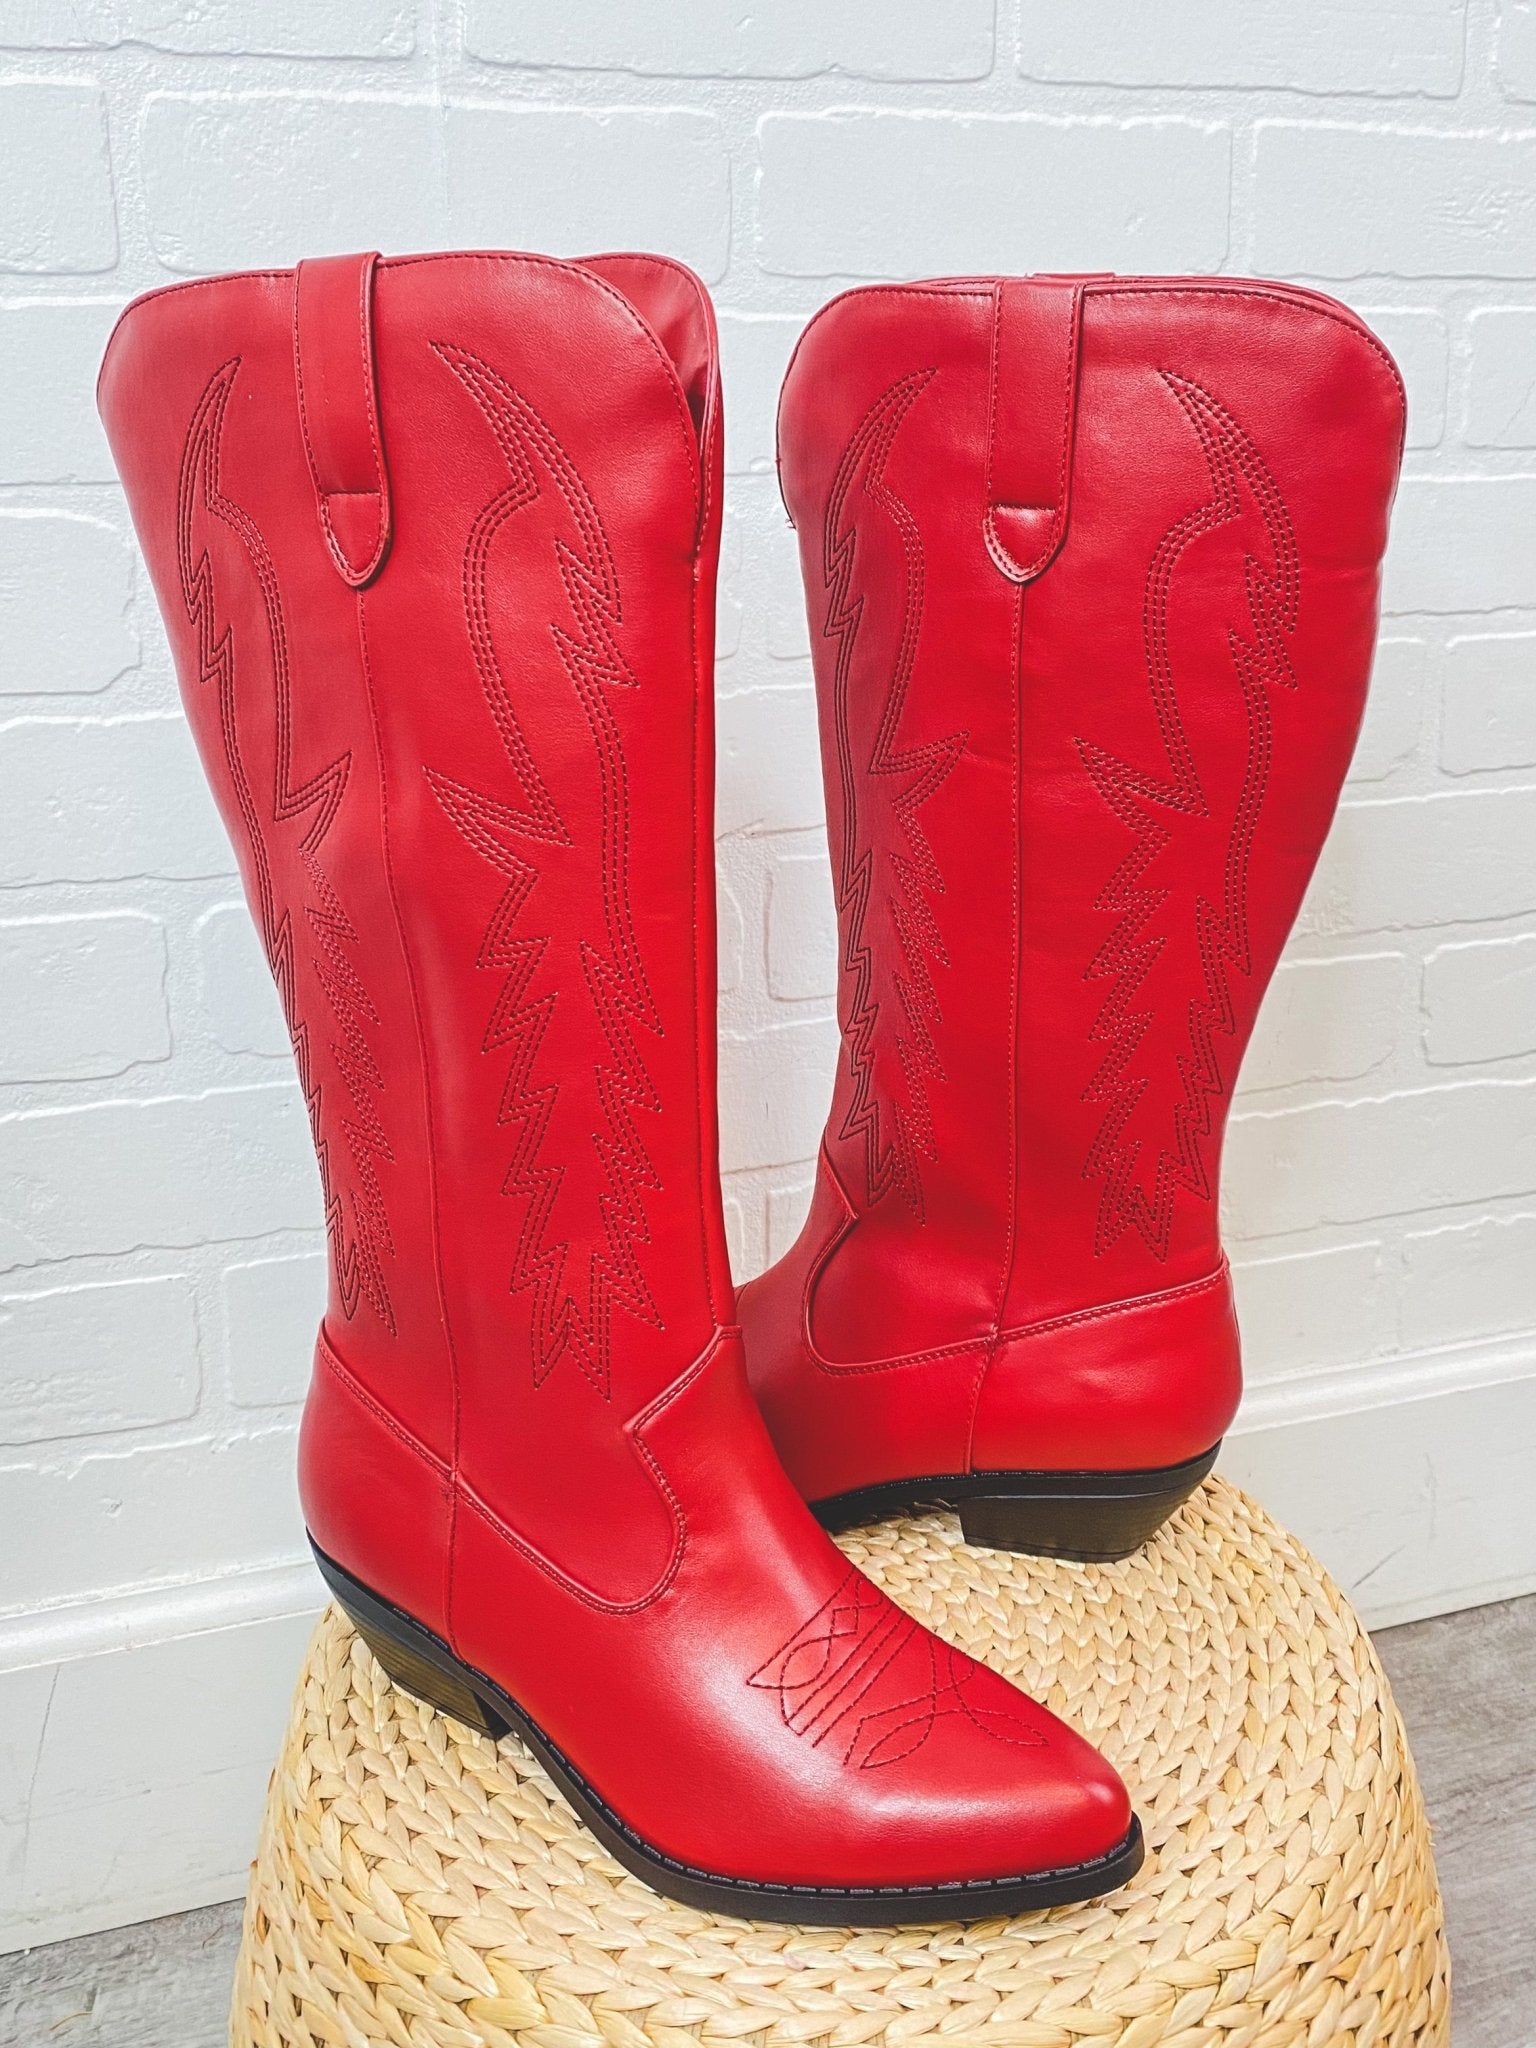 Cowboy western boots red - Trendy Holiday Apparel at Lush Fashion Lounge Boutique in Oklahoma City